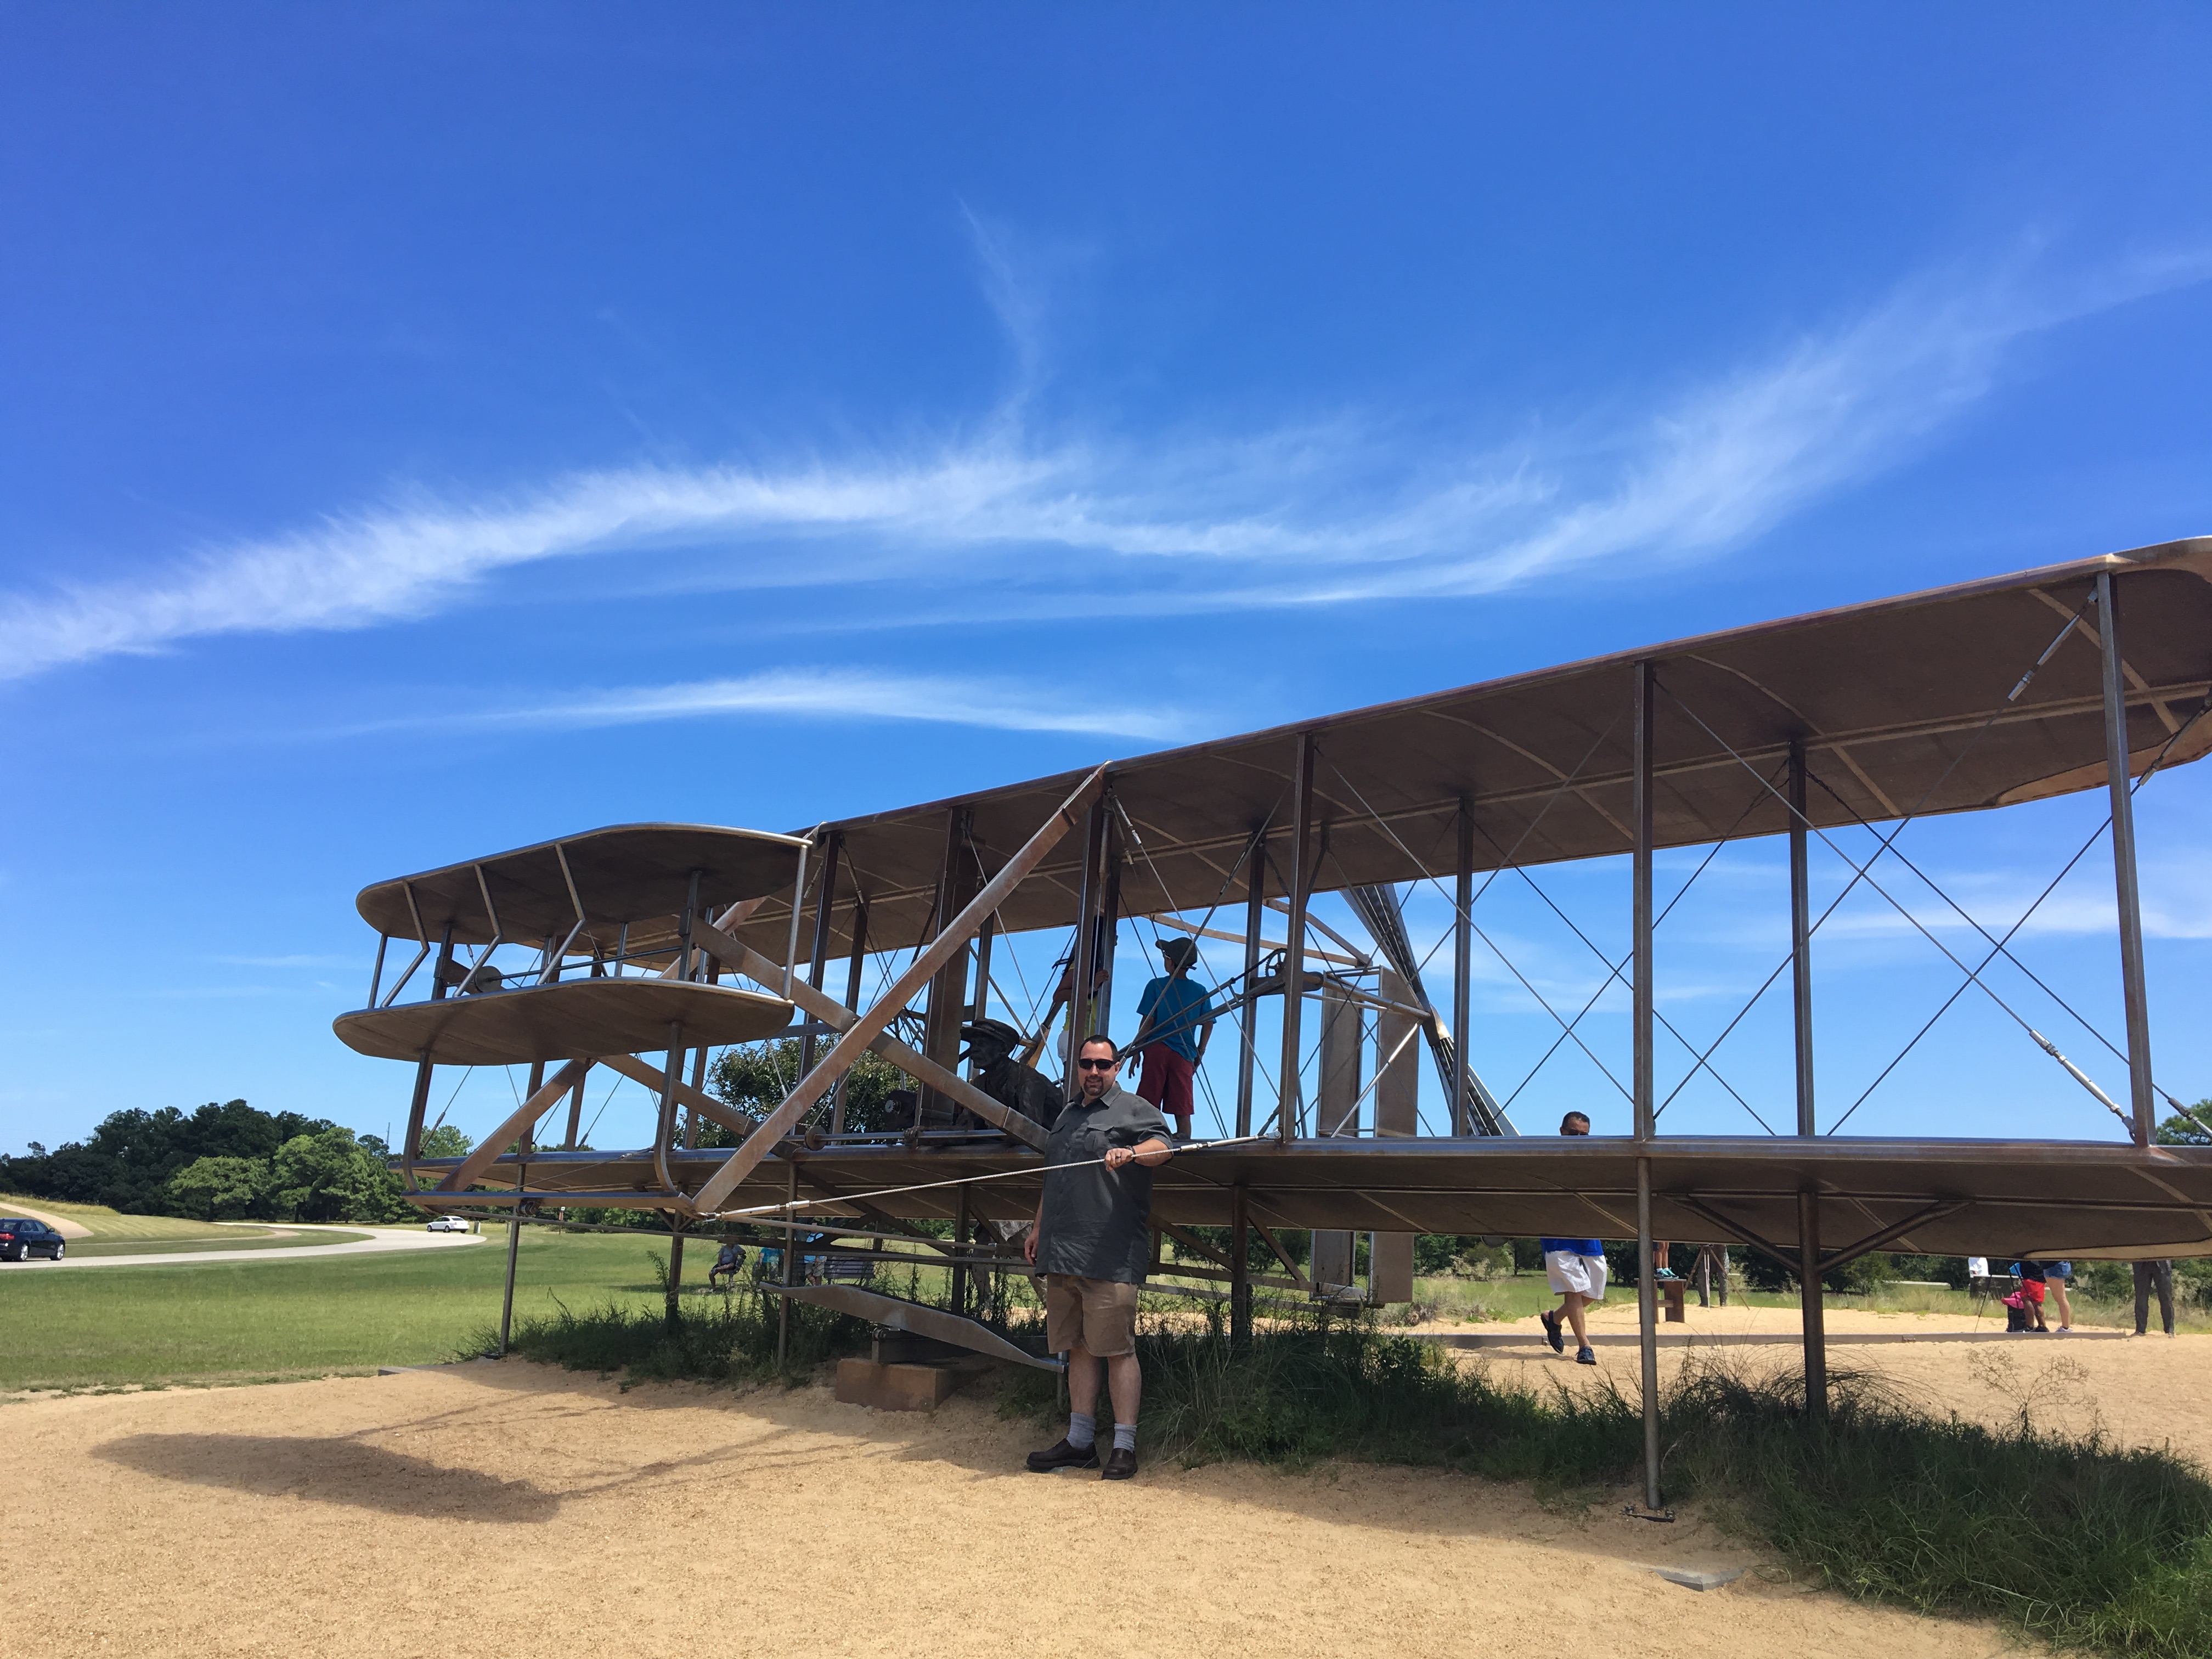 The Wright Brothers Memorial is a great stop as you make your way up the islands. (Cheryl Welch | Travel Beat Magazine)